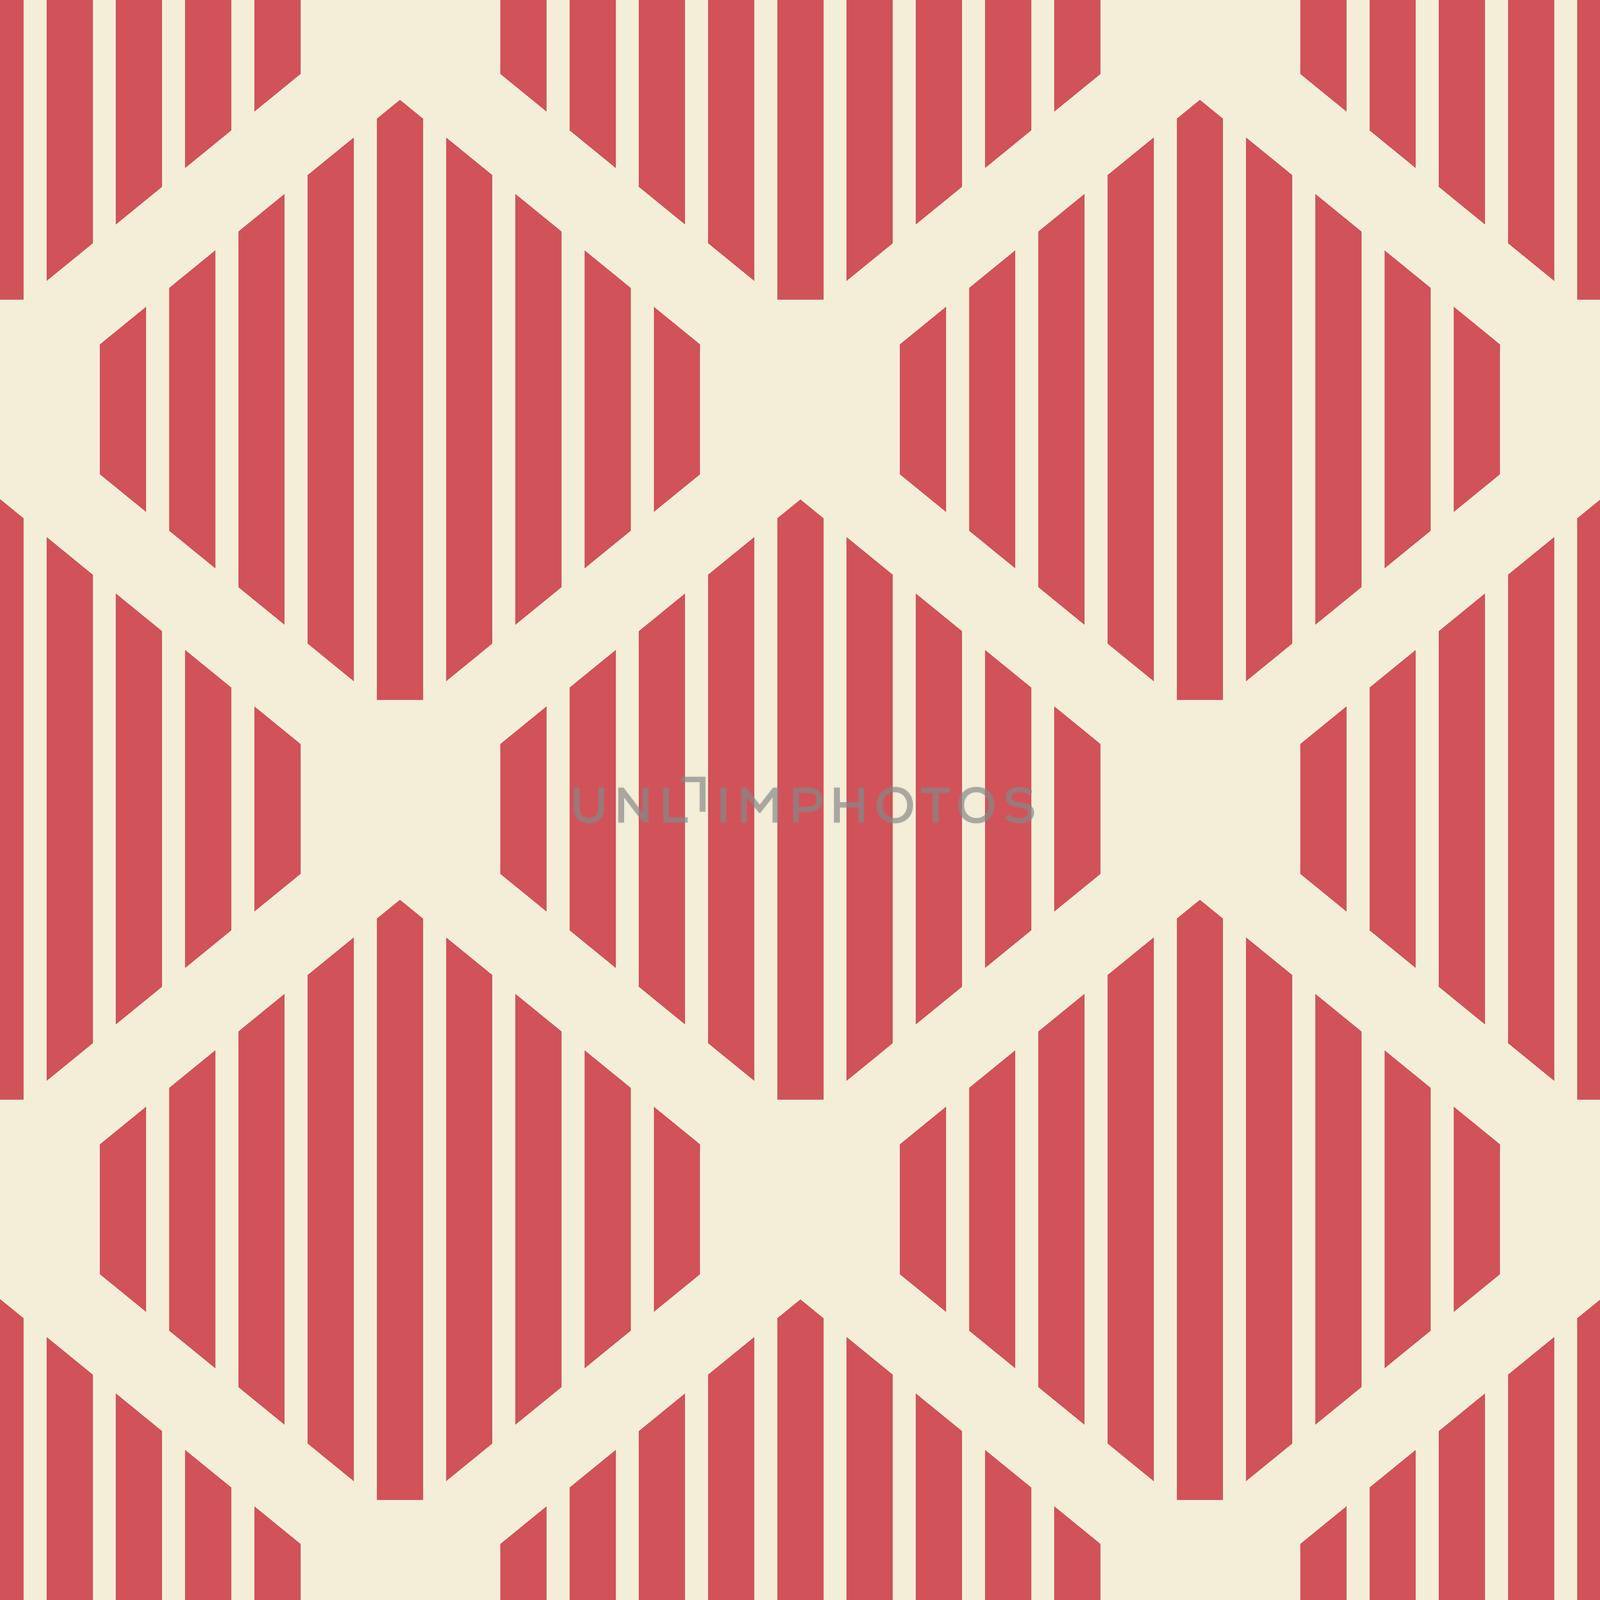 Abstract geometric design   geometric fantasy  abstract geometry   Background pattern with decorative geometric and abstract elements